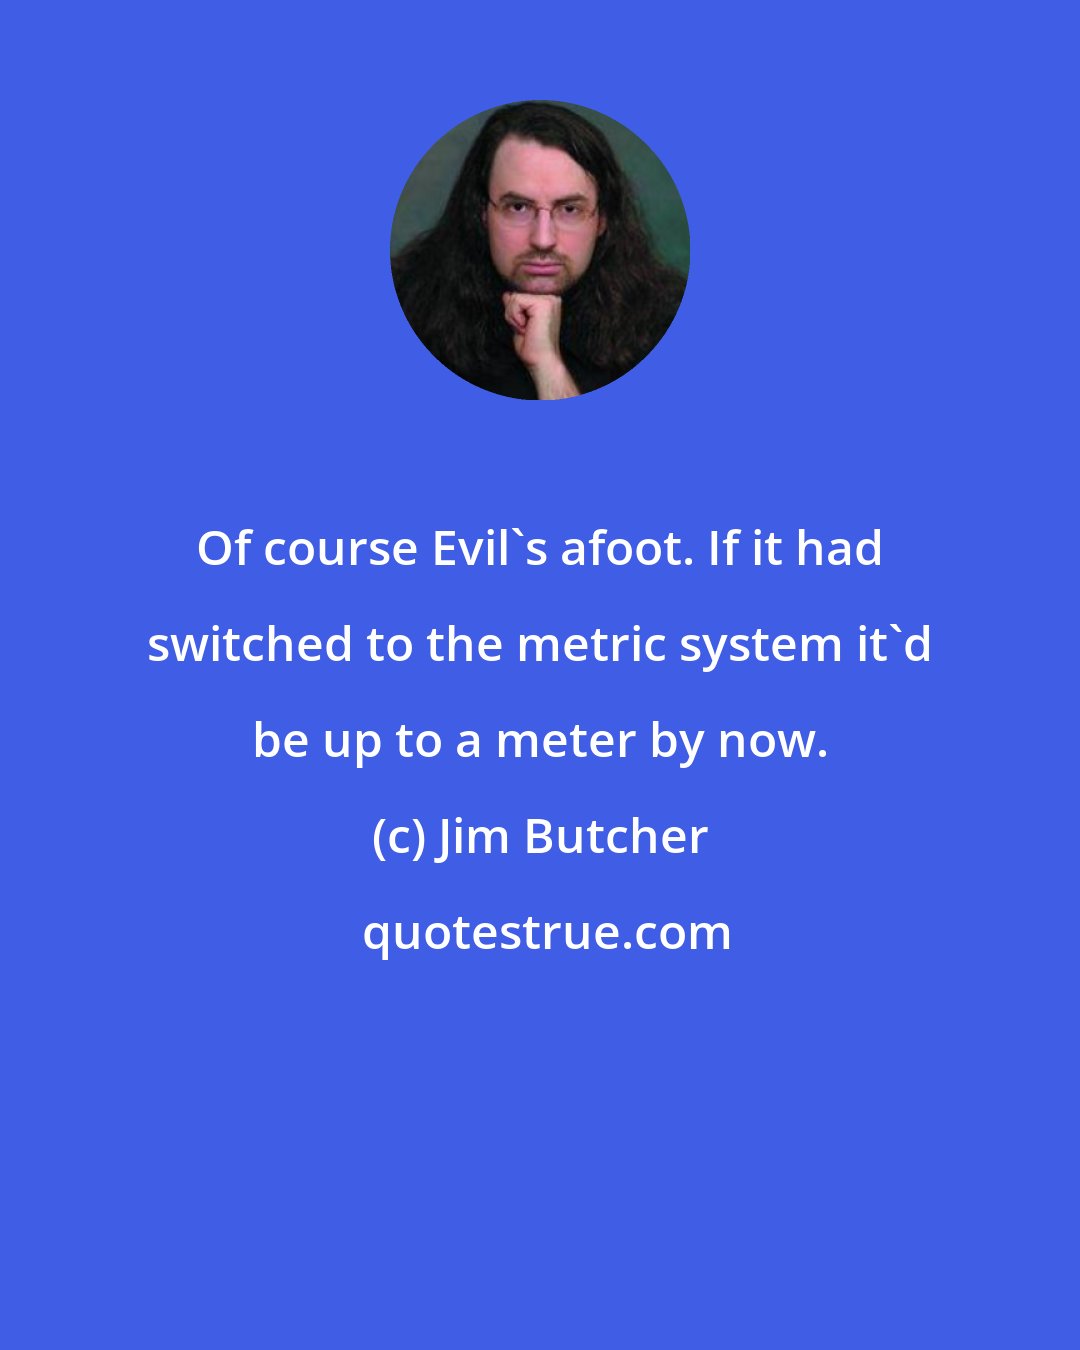 Jim Butcher: Of course Evil's afoot. If it had switched to the metric system it'd be up to a meter by now.